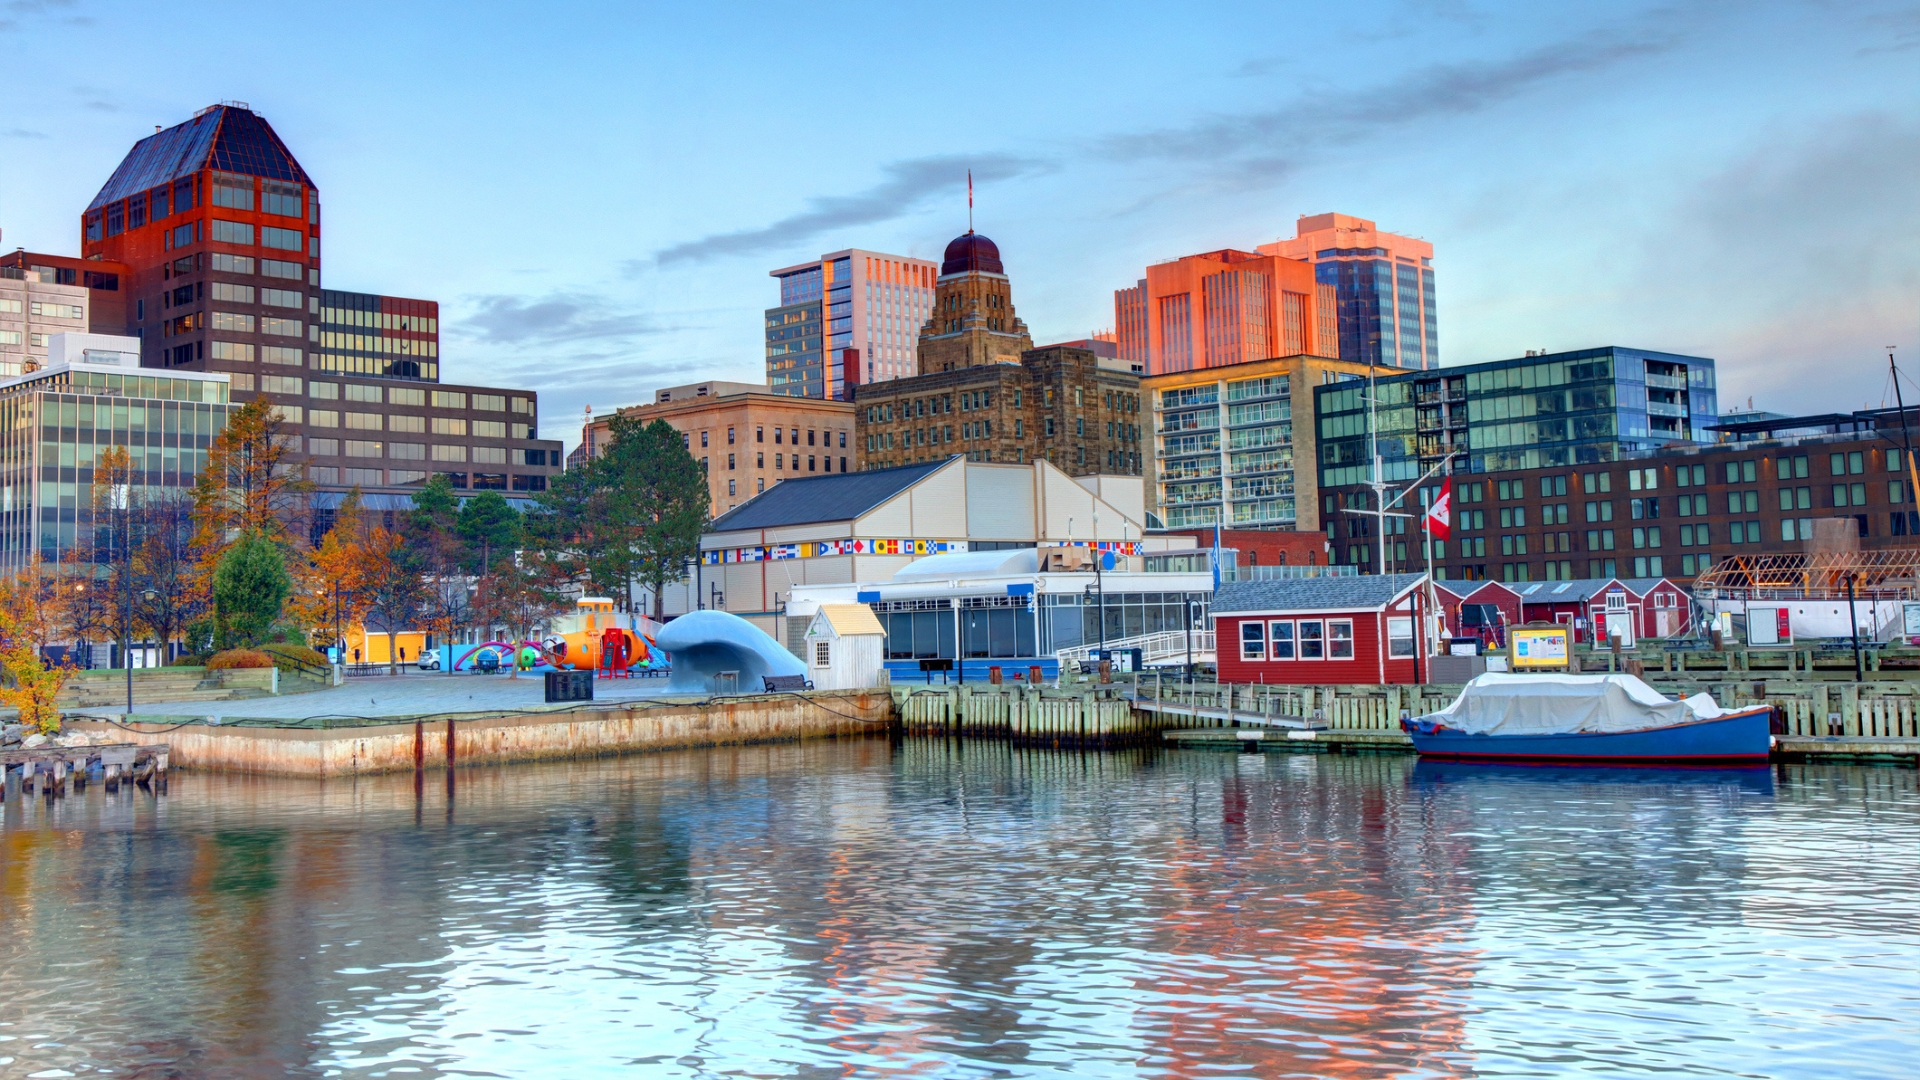 <p>Ocean views and a thriving maritime economy have long been associated with Nova Scotia, but this seaport now boasts an emerging technology industry. The newly redeveloped waterfront area features the Queen's Marque, with restaurants, art galleries and a five-star hotel.</p>